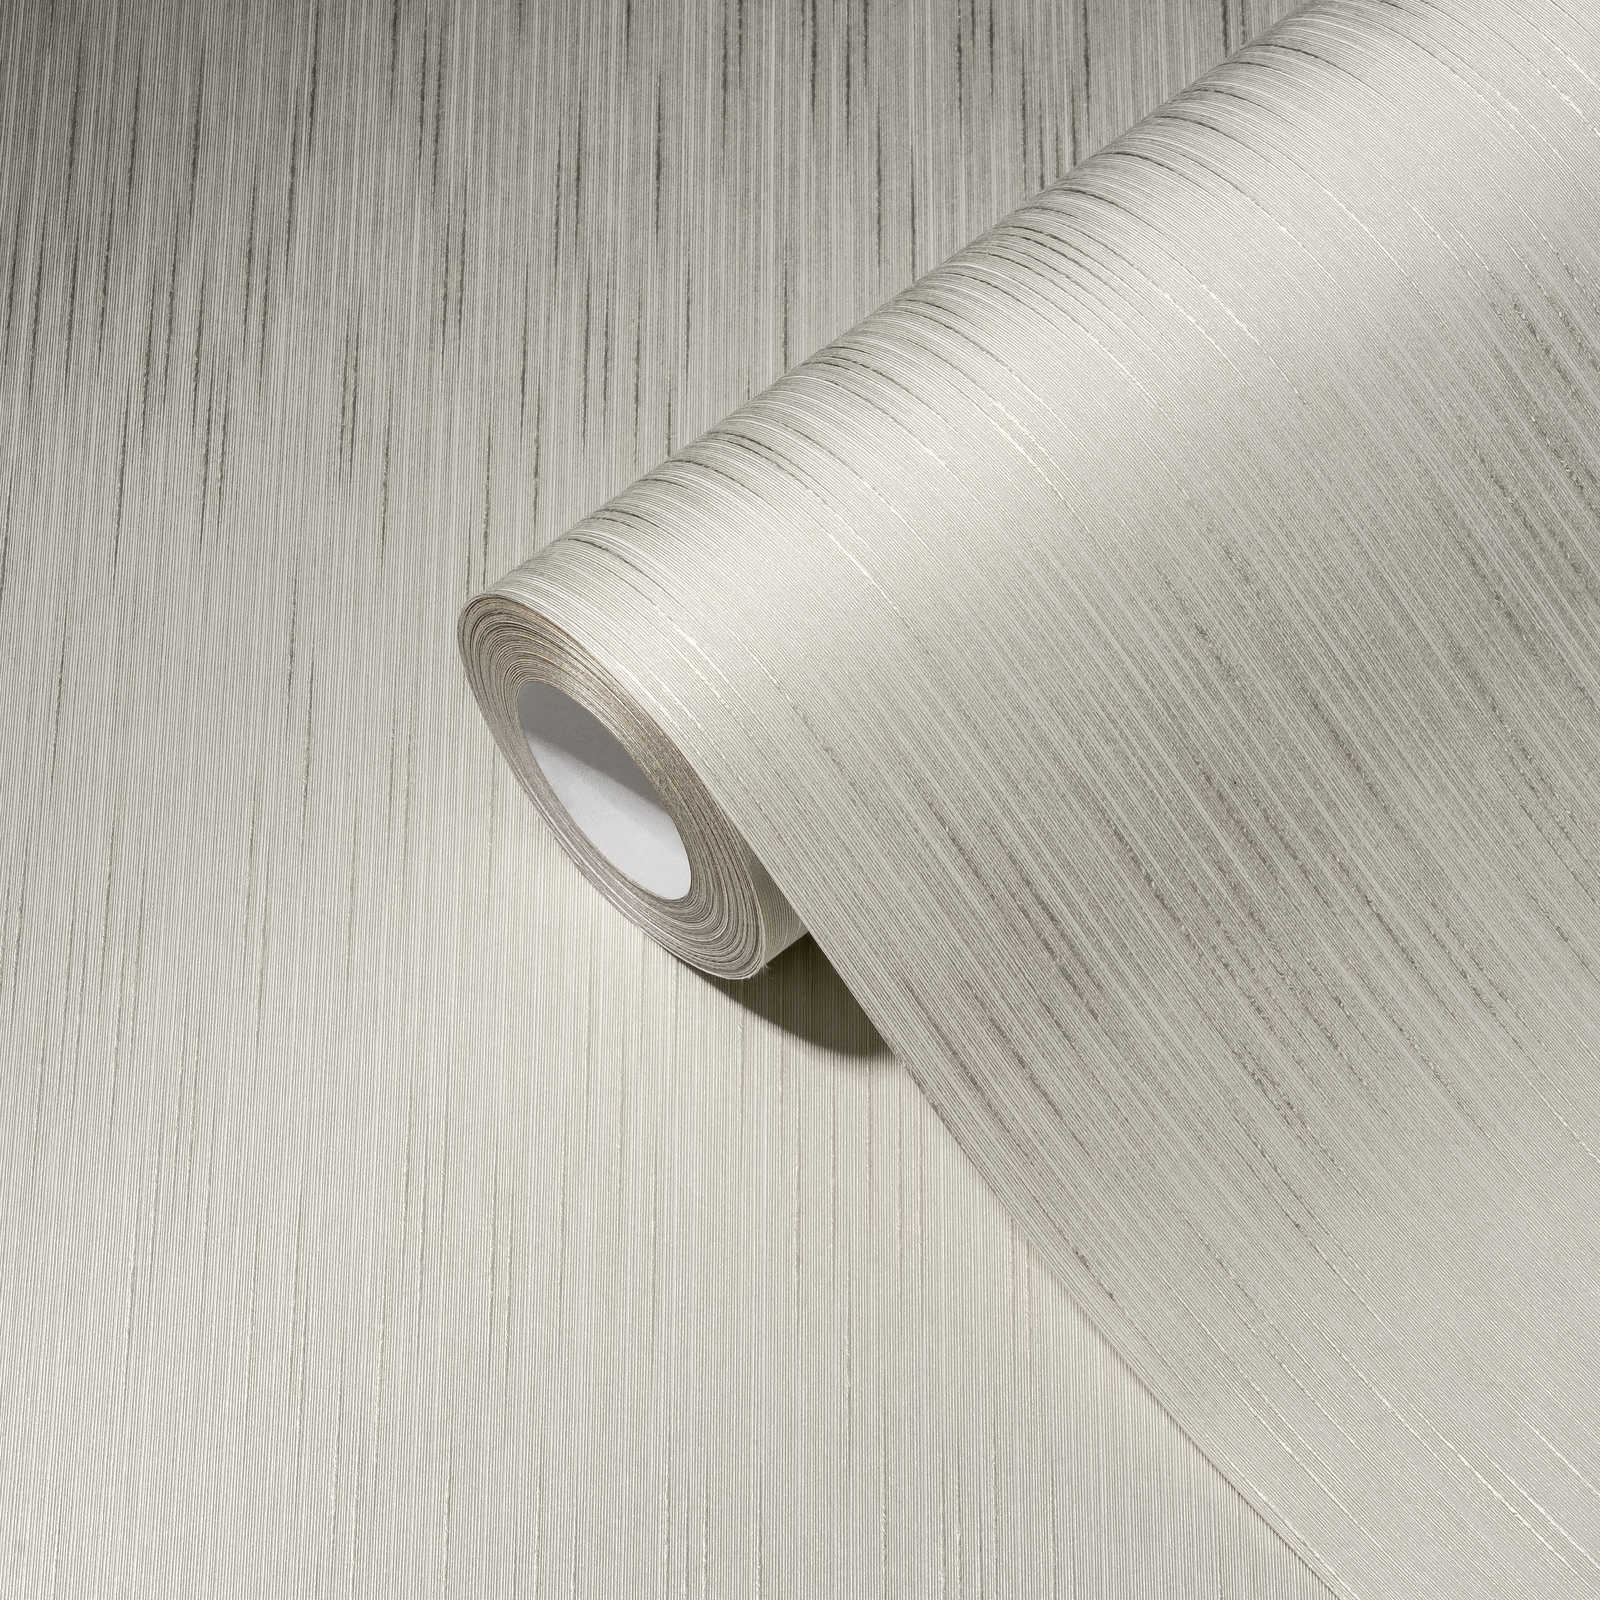             Satin wallpaper light grey with textile texture & mottled effect
        